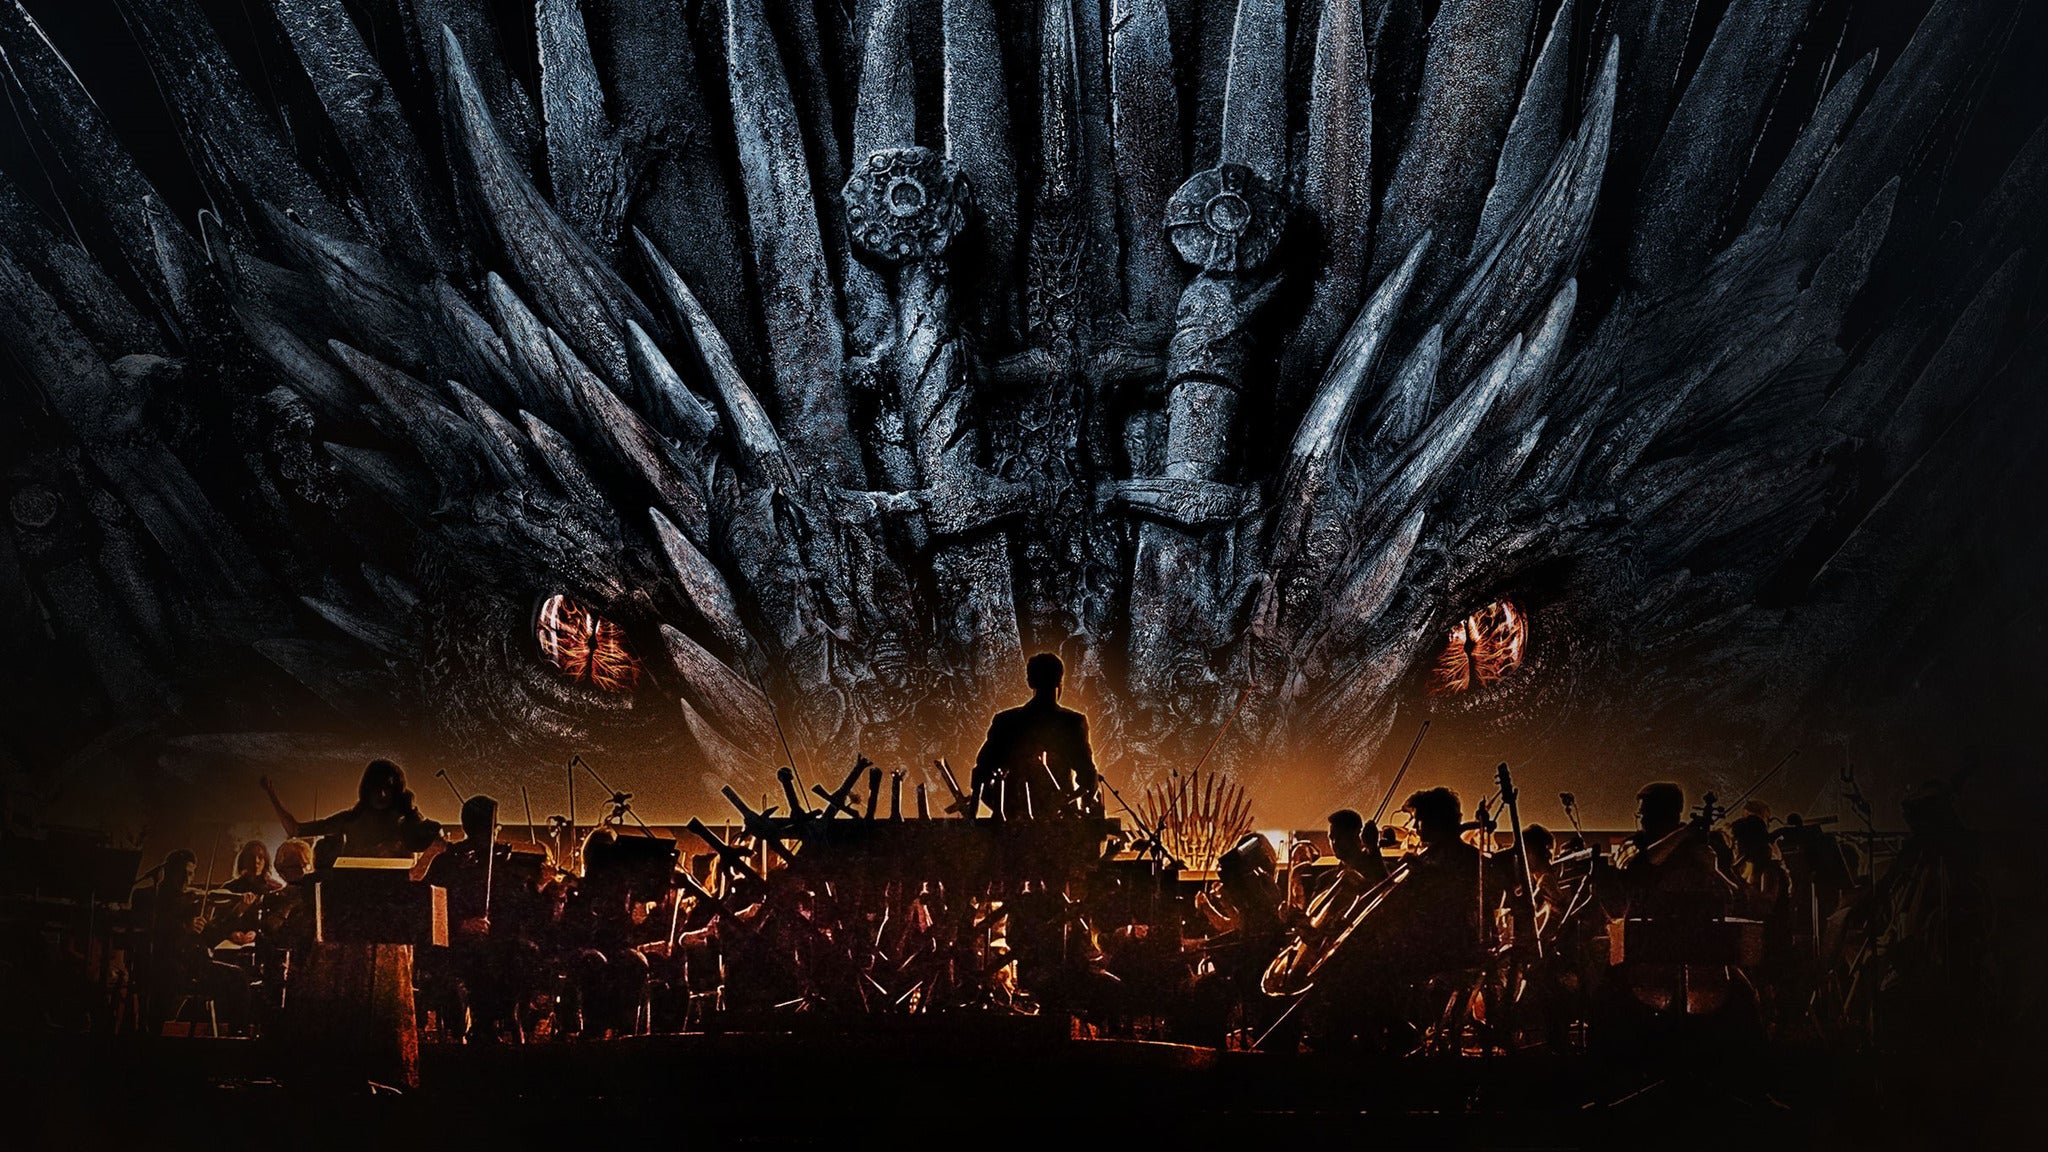 Game Of Thrones Live Concert Experience - Music By Ramin Djawadi in Virginia Beach promo photo for Official Platinum presale offer code